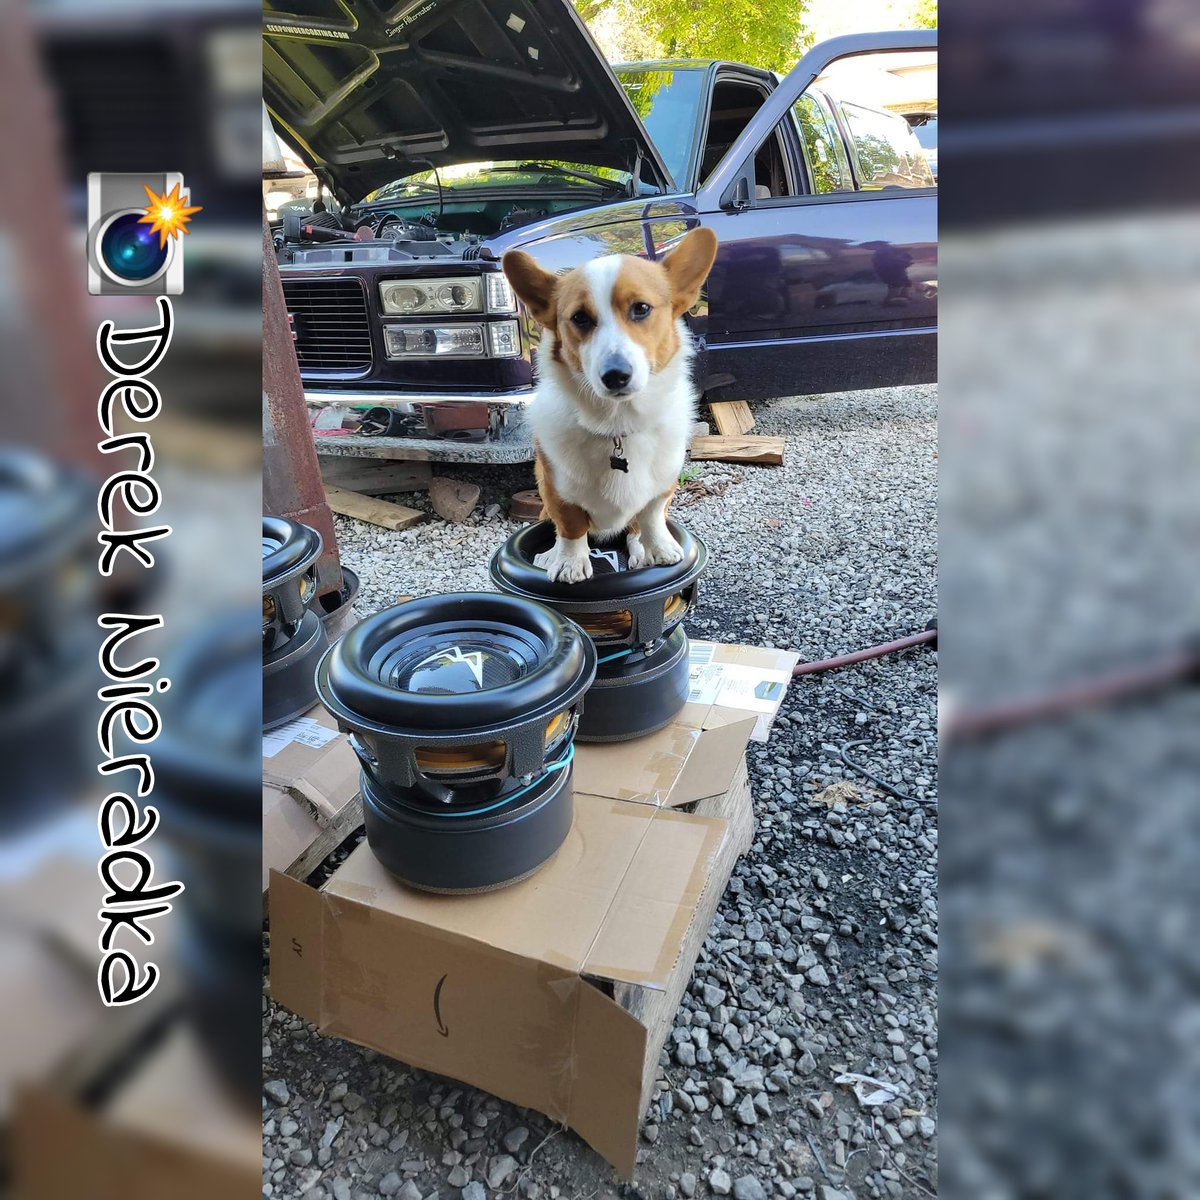 🔊😁🎶🐕 Woofers on woofers! Side not... What's that logo😉 Could we be seeing more from #AscendantAudio soon? 
Shop #caraudio -bit.ly/3z0KDg0
#12voltmag #12volt #caraudioaddicts #subwoofers